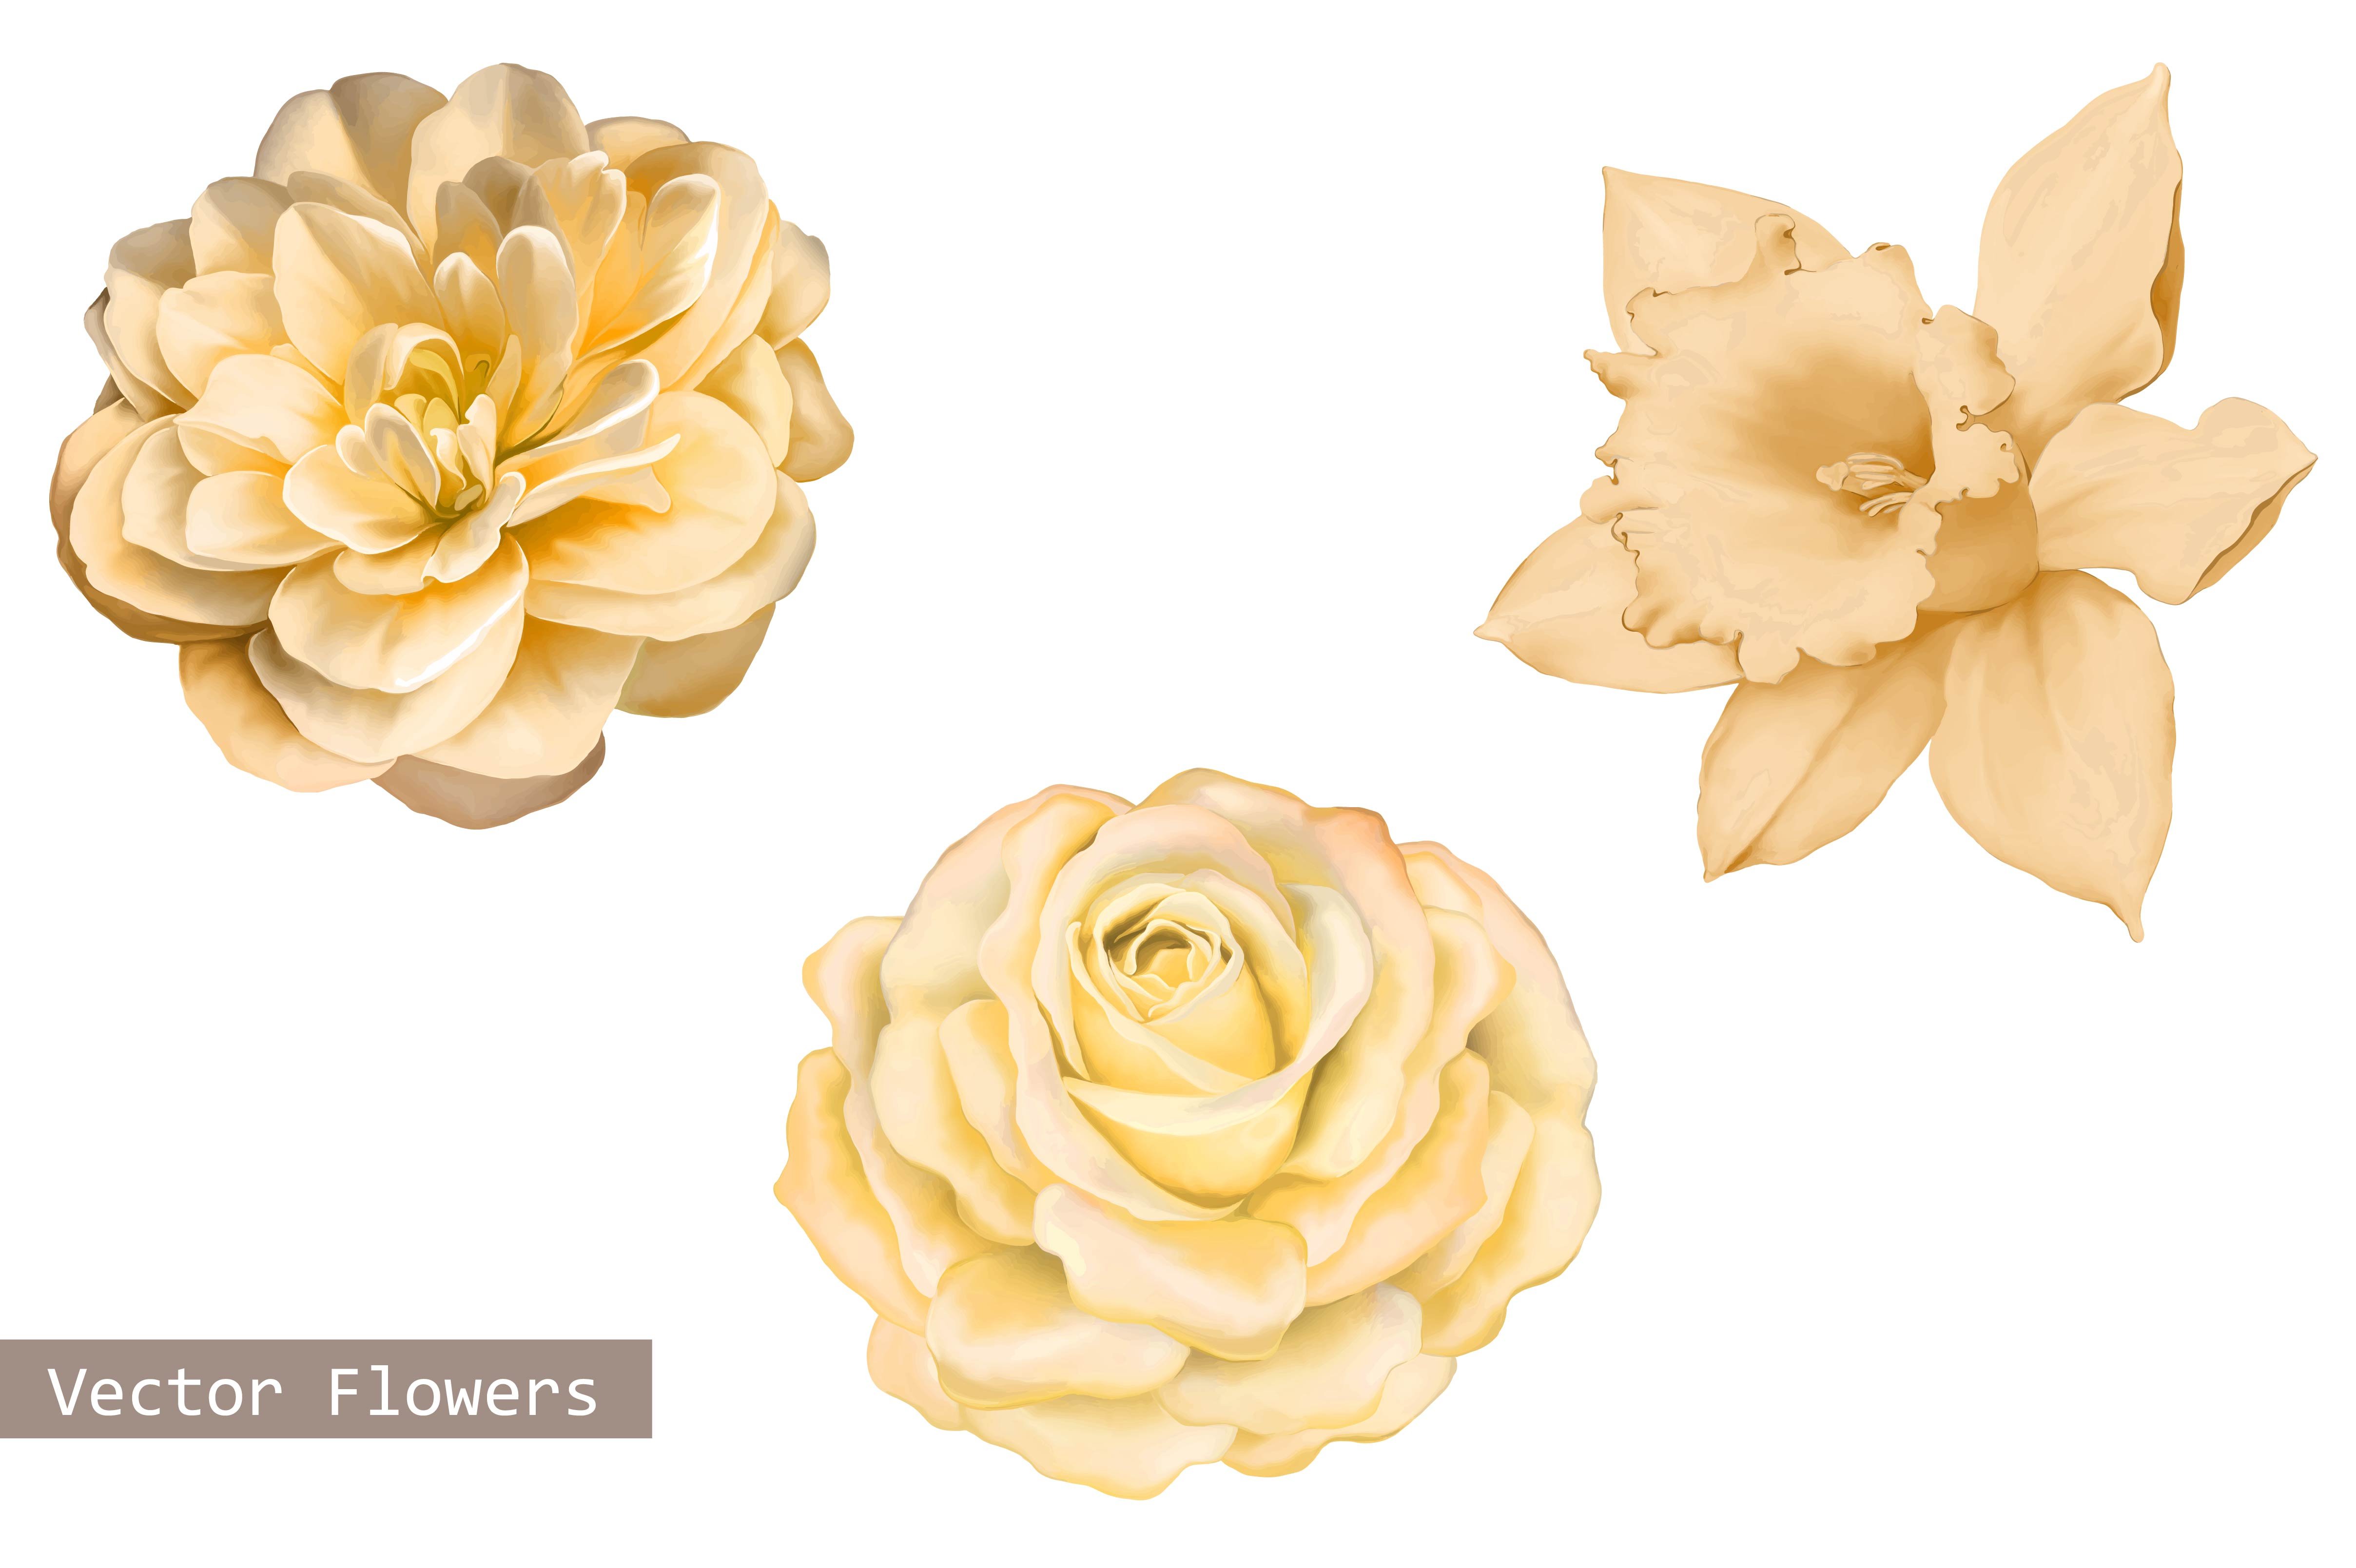 Yellow Camellia, Rose,Daffodil cover image.